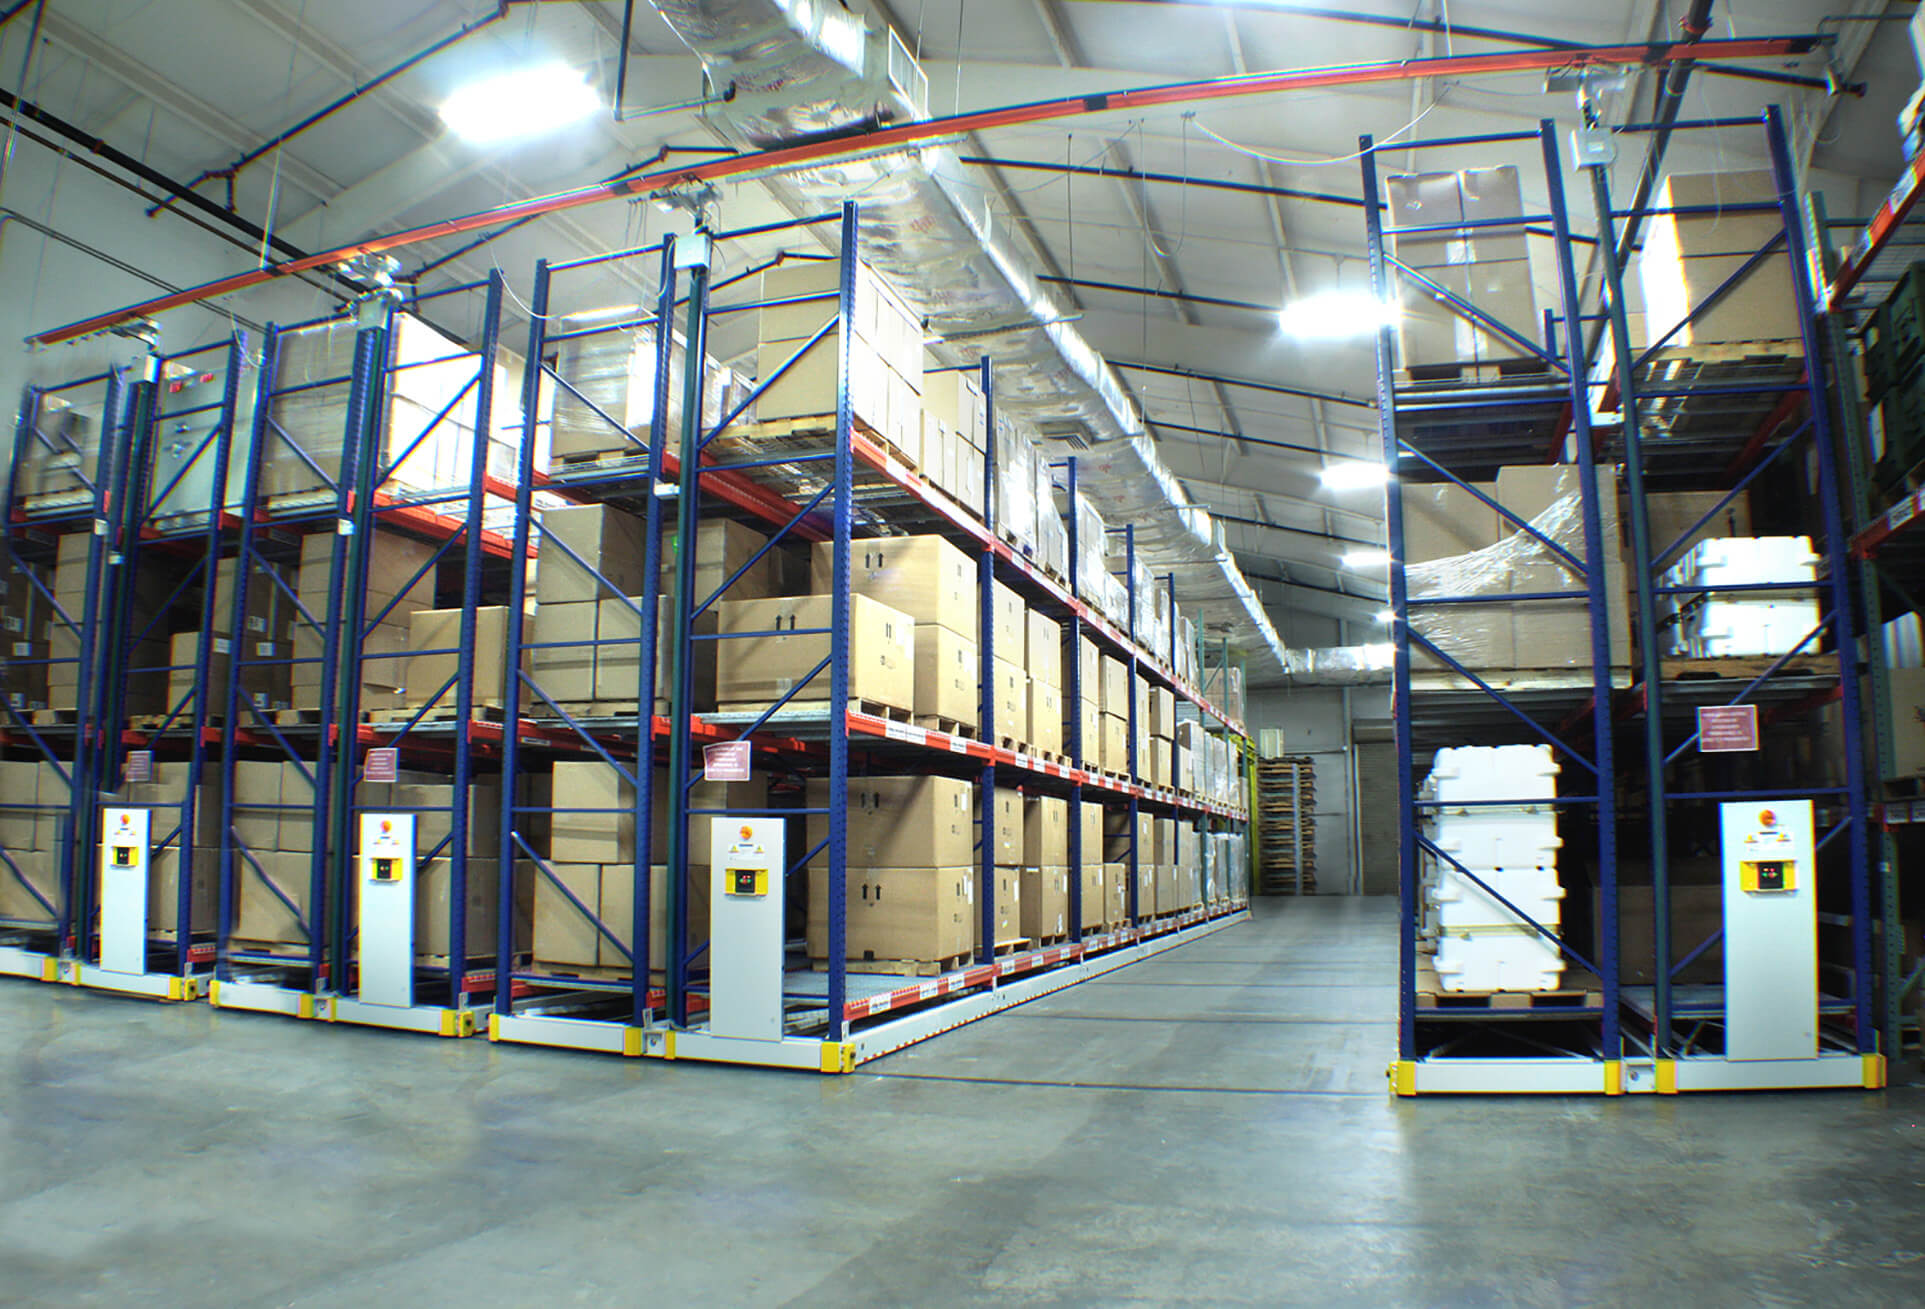 Warehouse materials stored on powered compact racking system